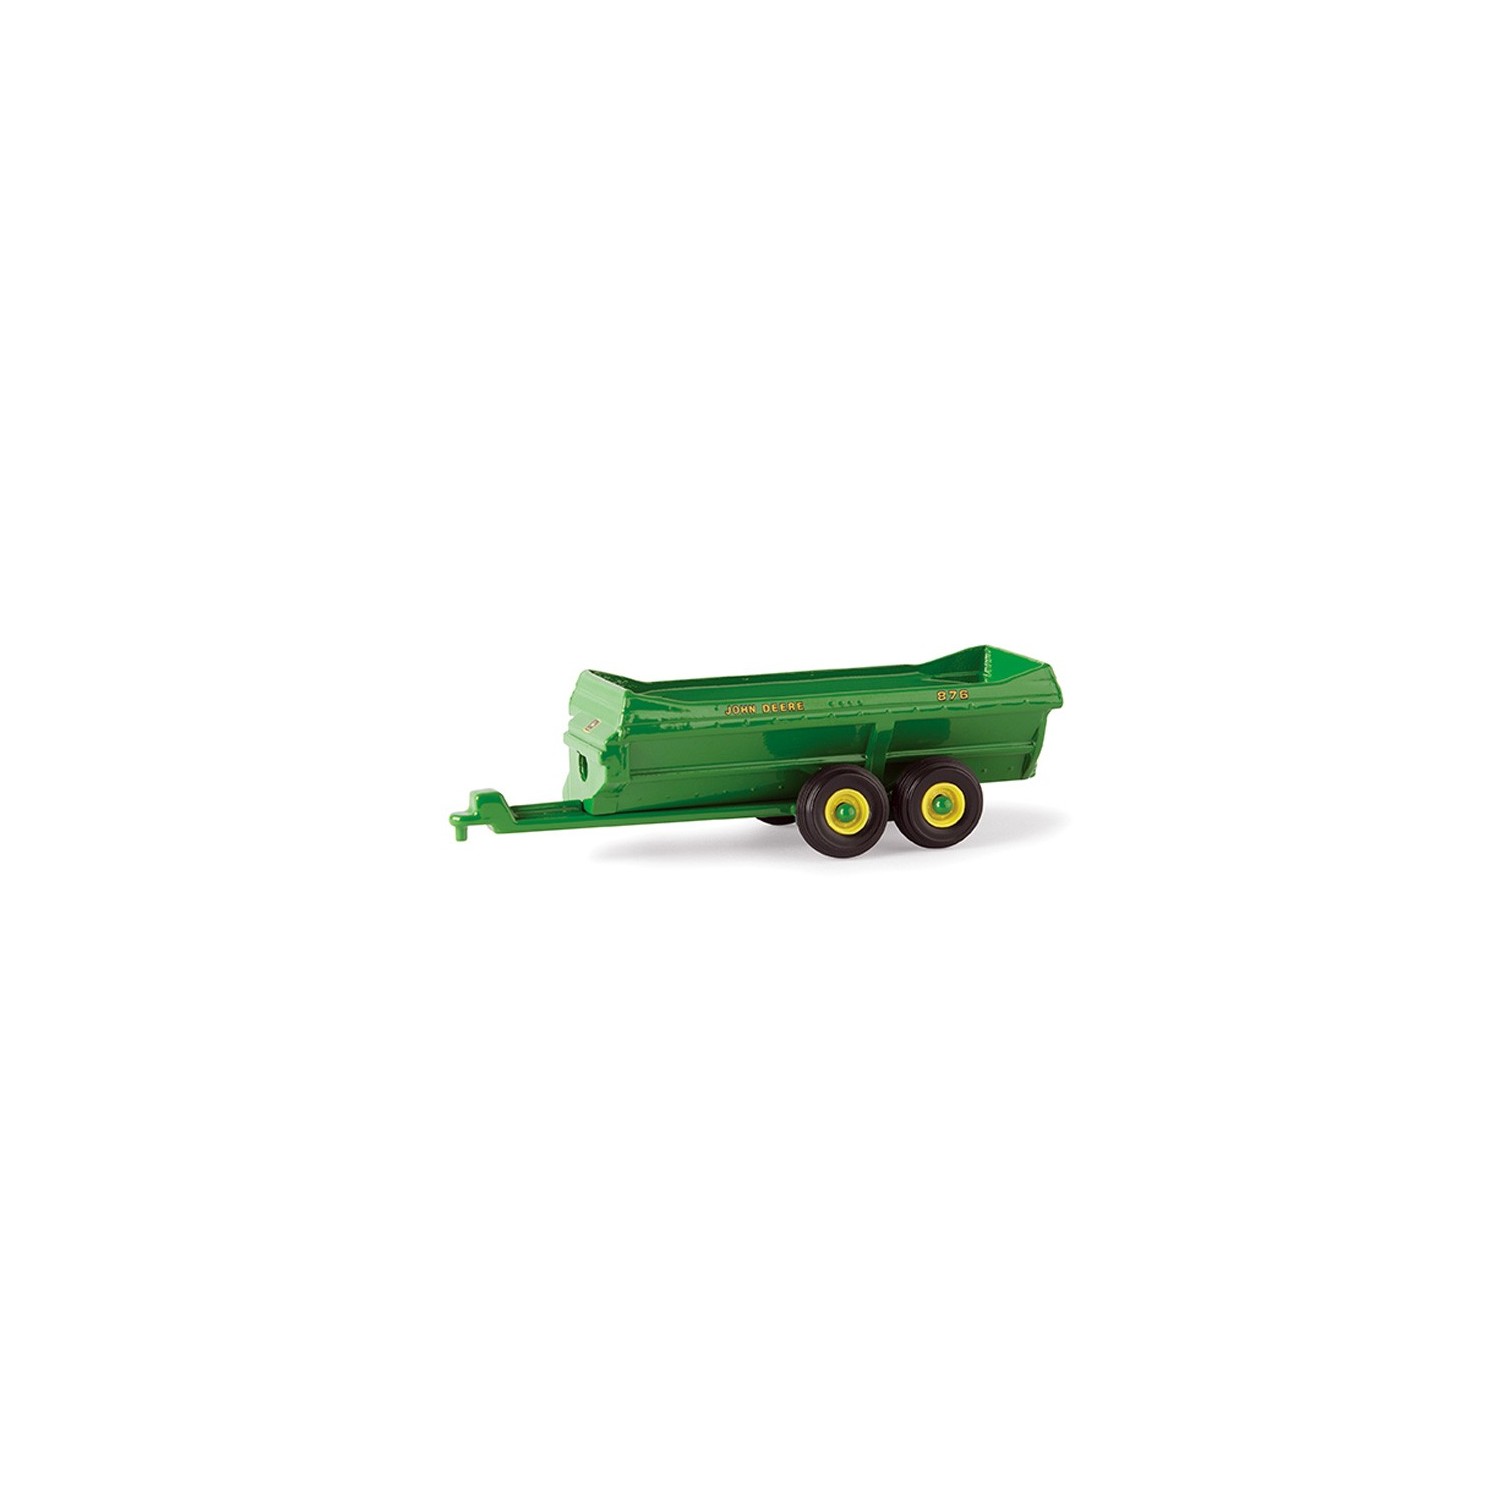 1/64 John Deere 876 V-Tank Manure Spreader Tractor Implement New in Box by ERTL 